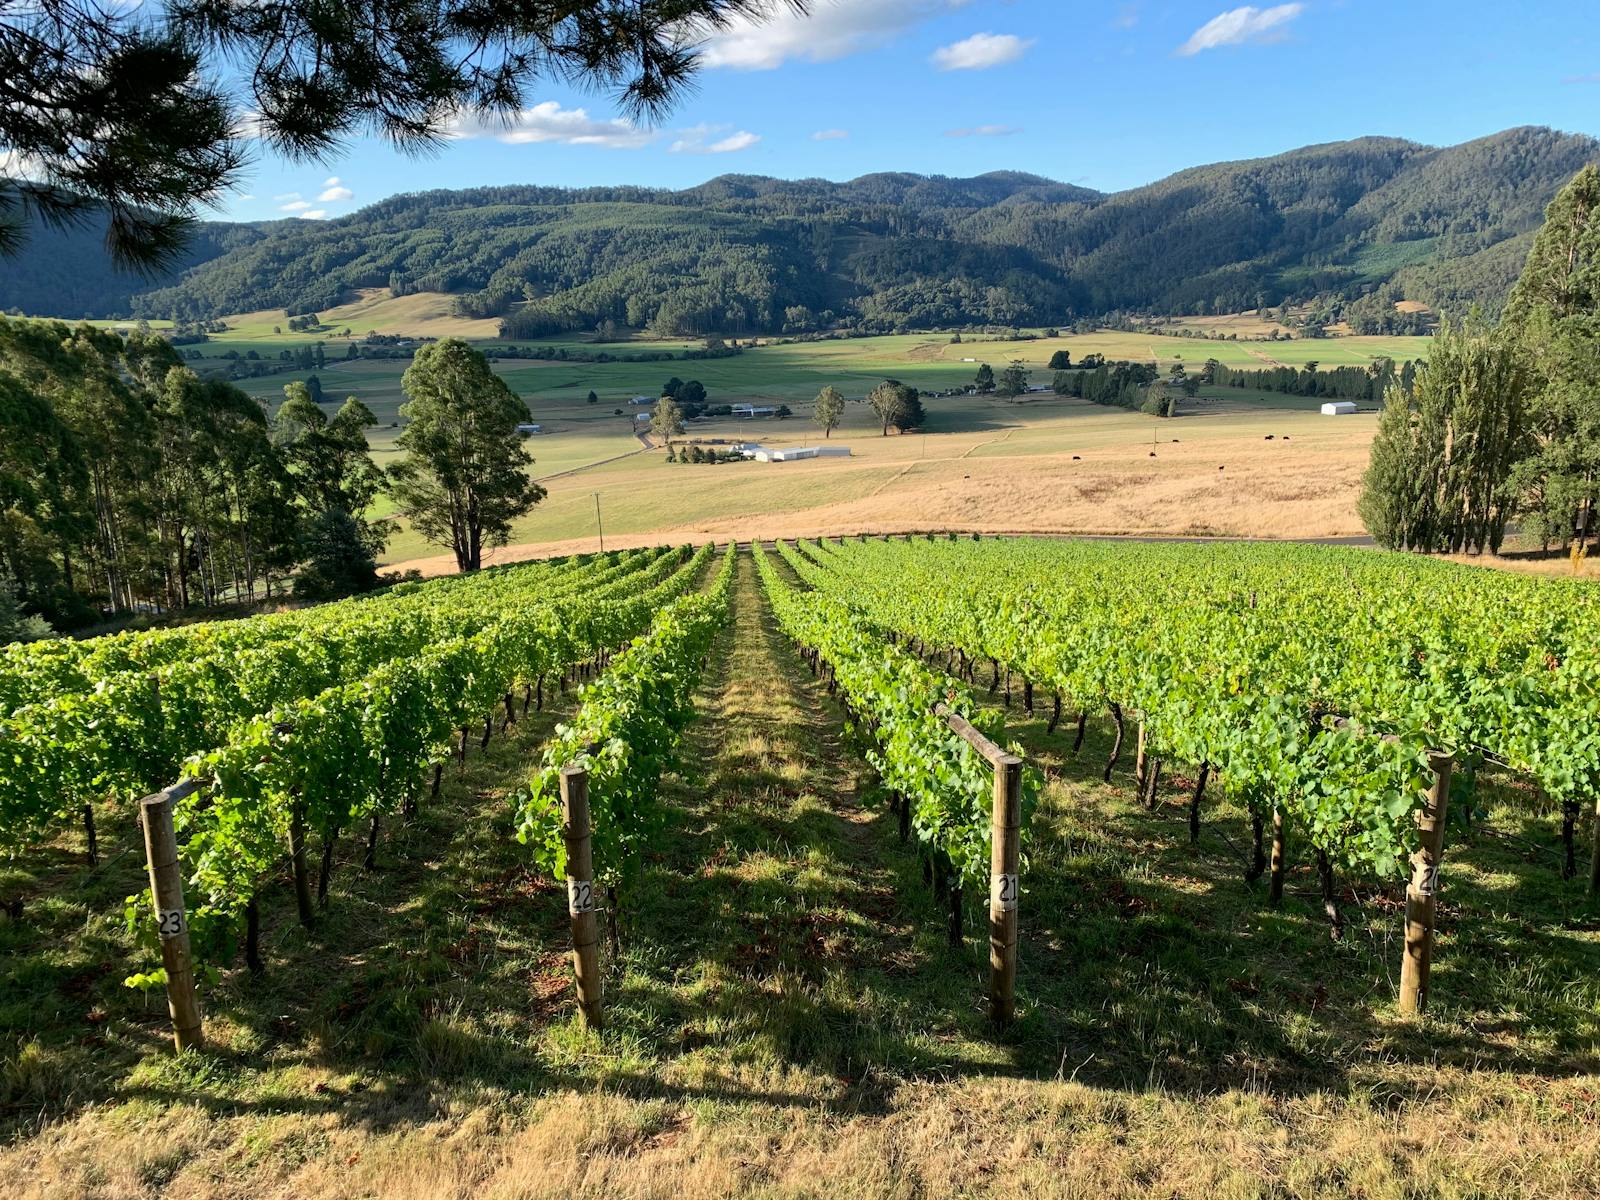 Overview of rows of grape vines with view of Gunns Plains and surrounding hills